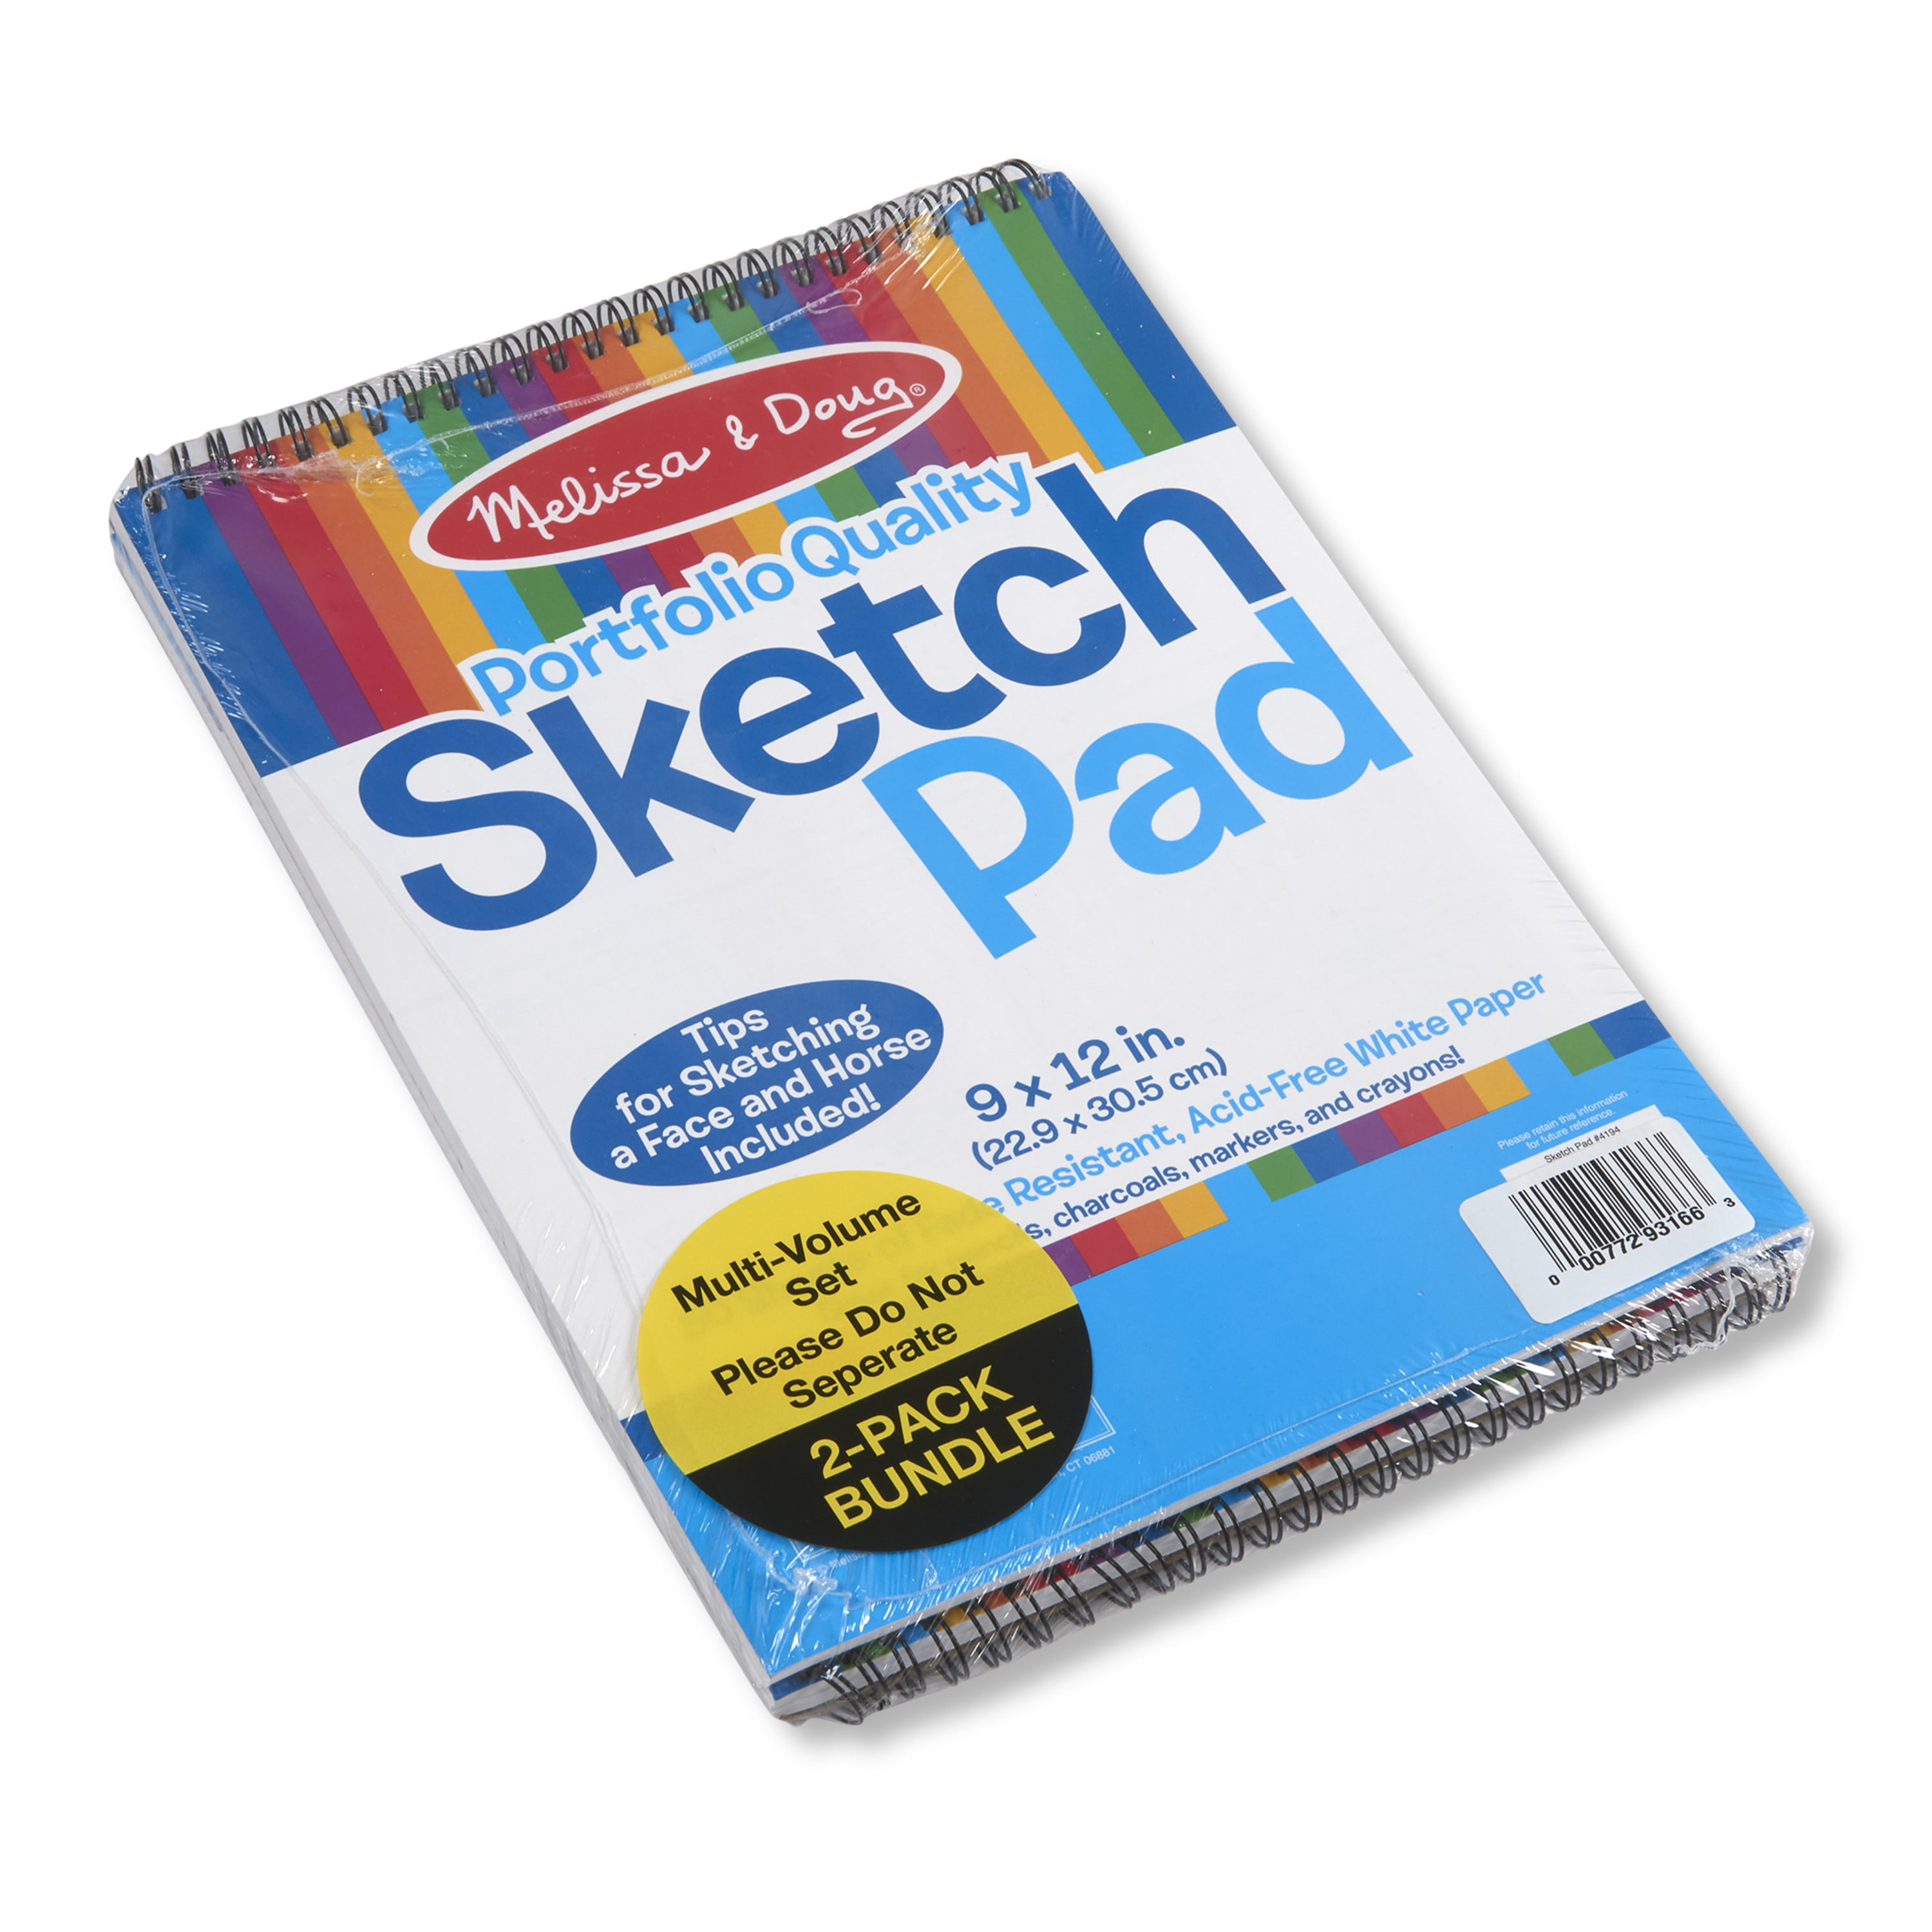 2-Pack Large Drawing Sketch Pad for Kids (12 x 16, 50 Pages Each), 60lbs /90gsm Paper Ideal for Finger Painting, Pencils, Tempera and Markers.